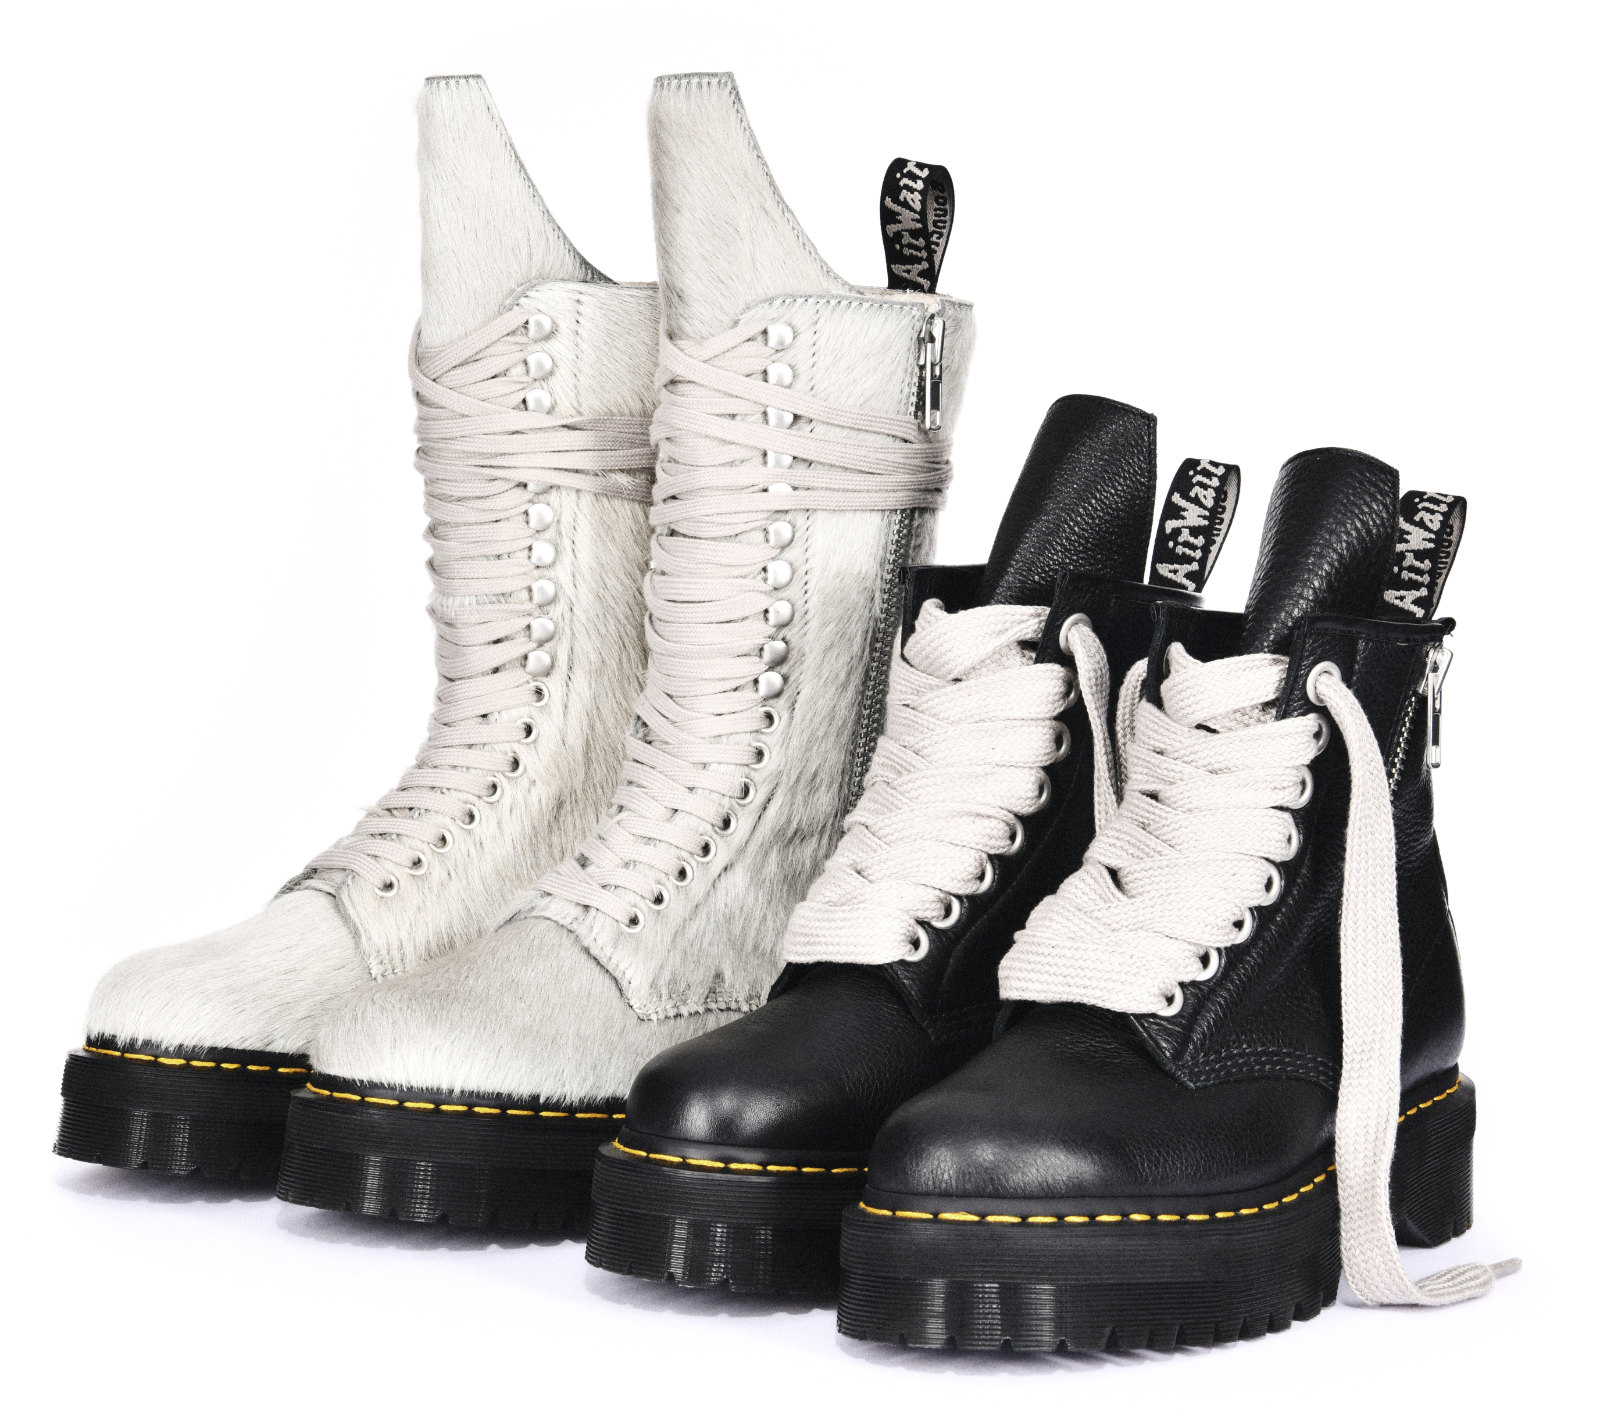 Dr Martens × Rick Owens collaboration: extravagant boots with '90s